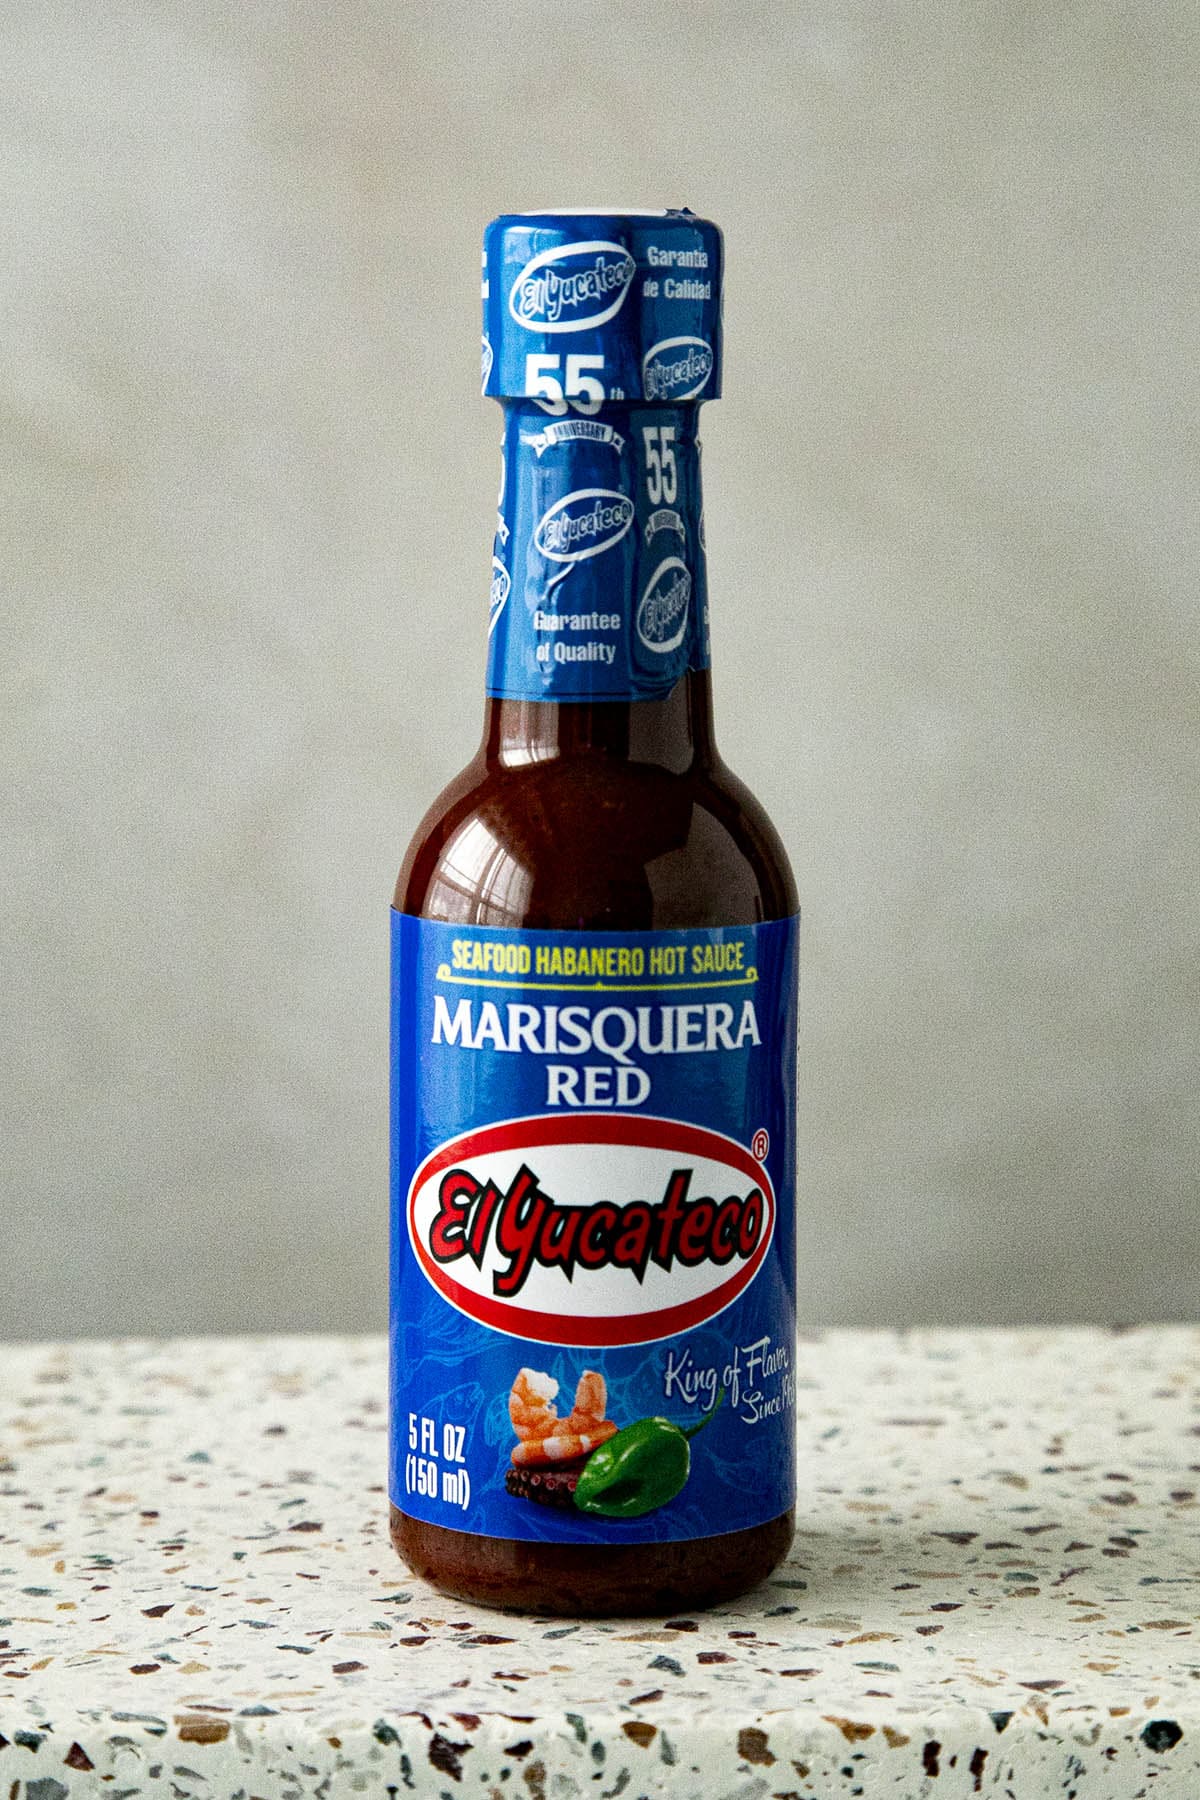 A bottle of El Yucateco Marisquera Red Seafood Habanero Hot Sauce